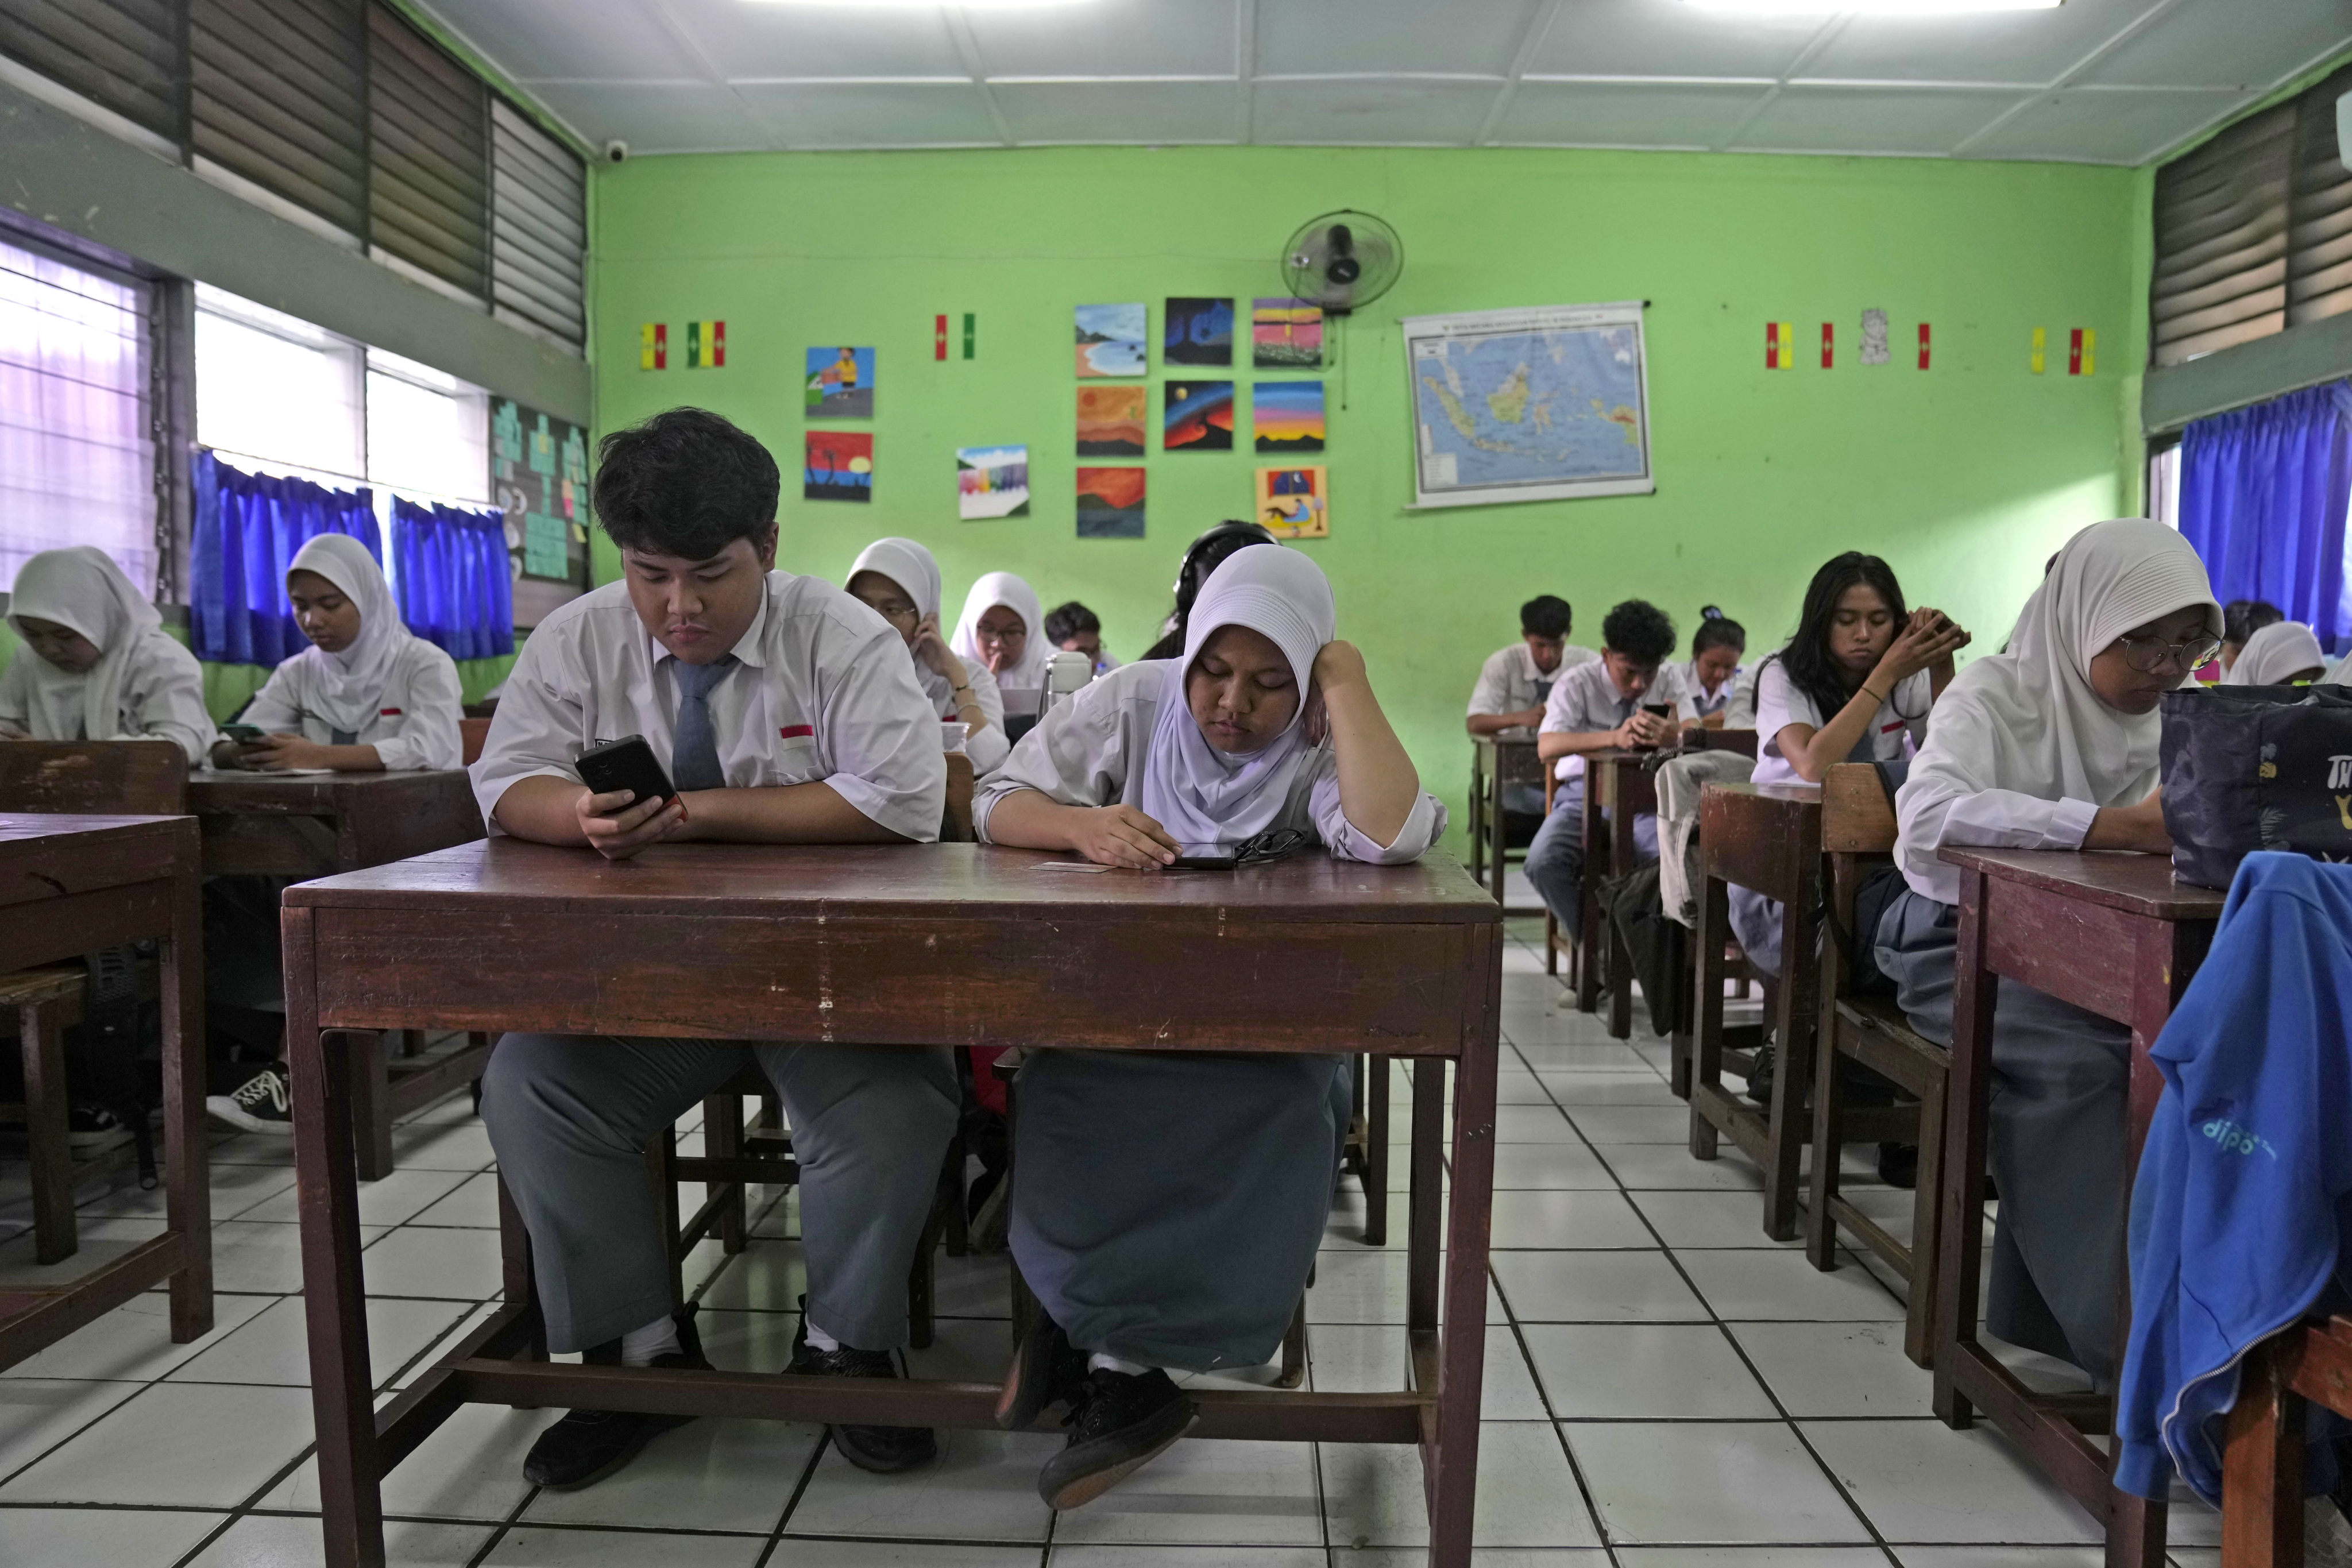 Students use their mobile phones to work on an online exercise at a high school in Jakarta, Indonesia, in January. Photo: AP